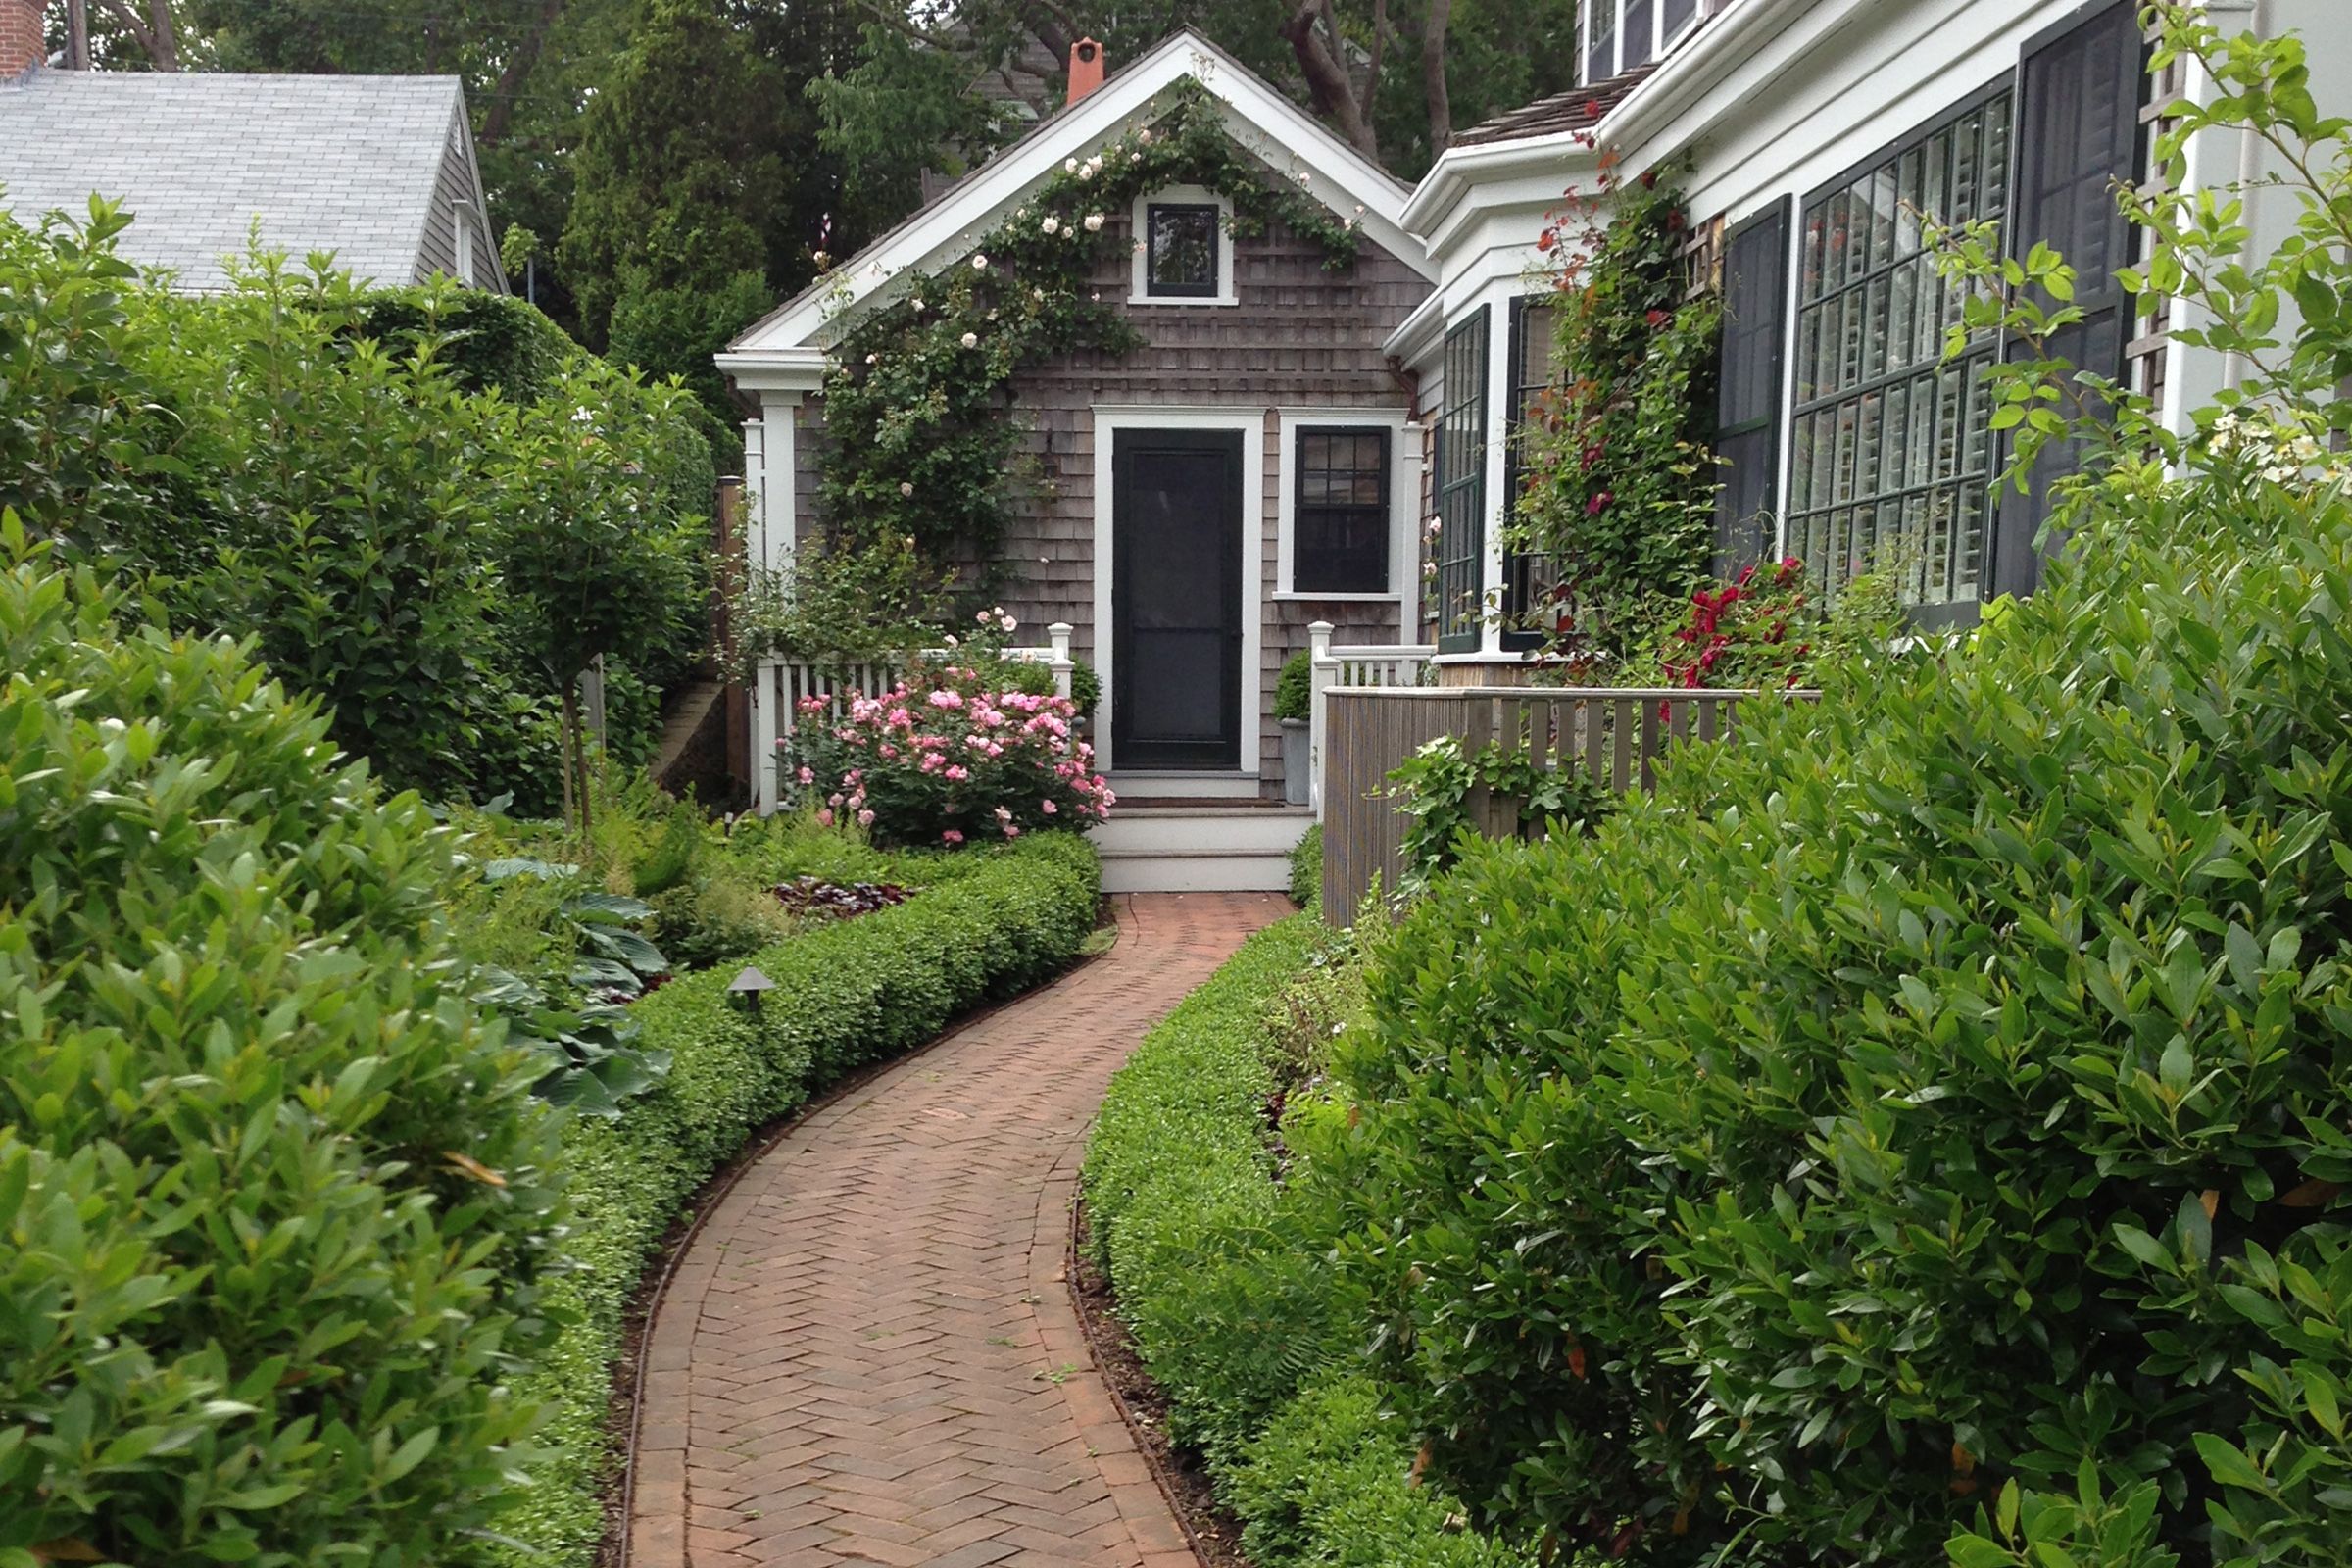 0222_NB_All_About_Brick_Pavers_walkway_crop